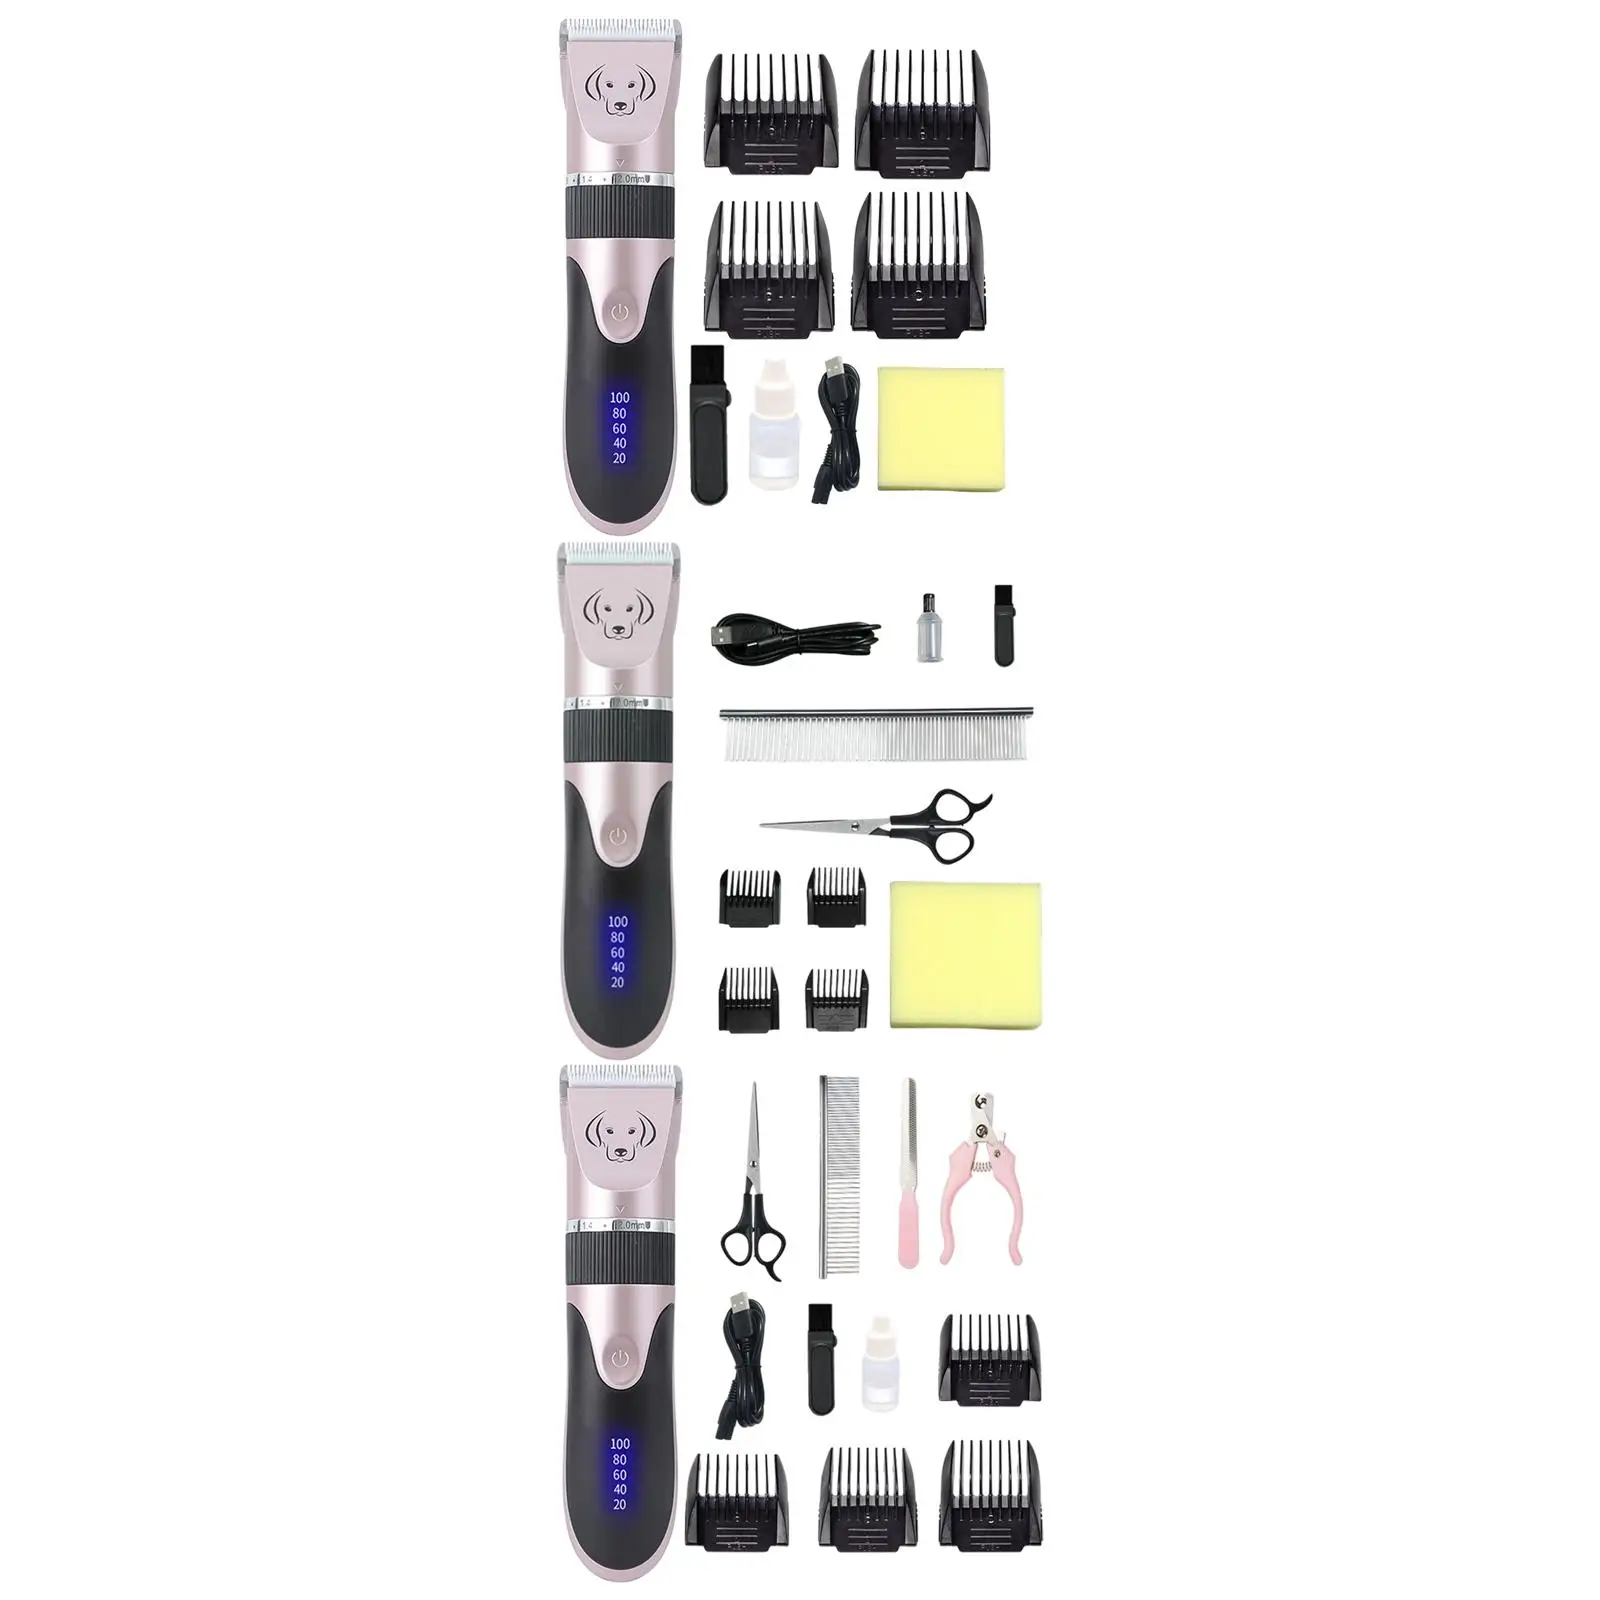 Professional Pet Clippers Cordless Detachable Blades Shaver Kit for Pets Dogs Cats